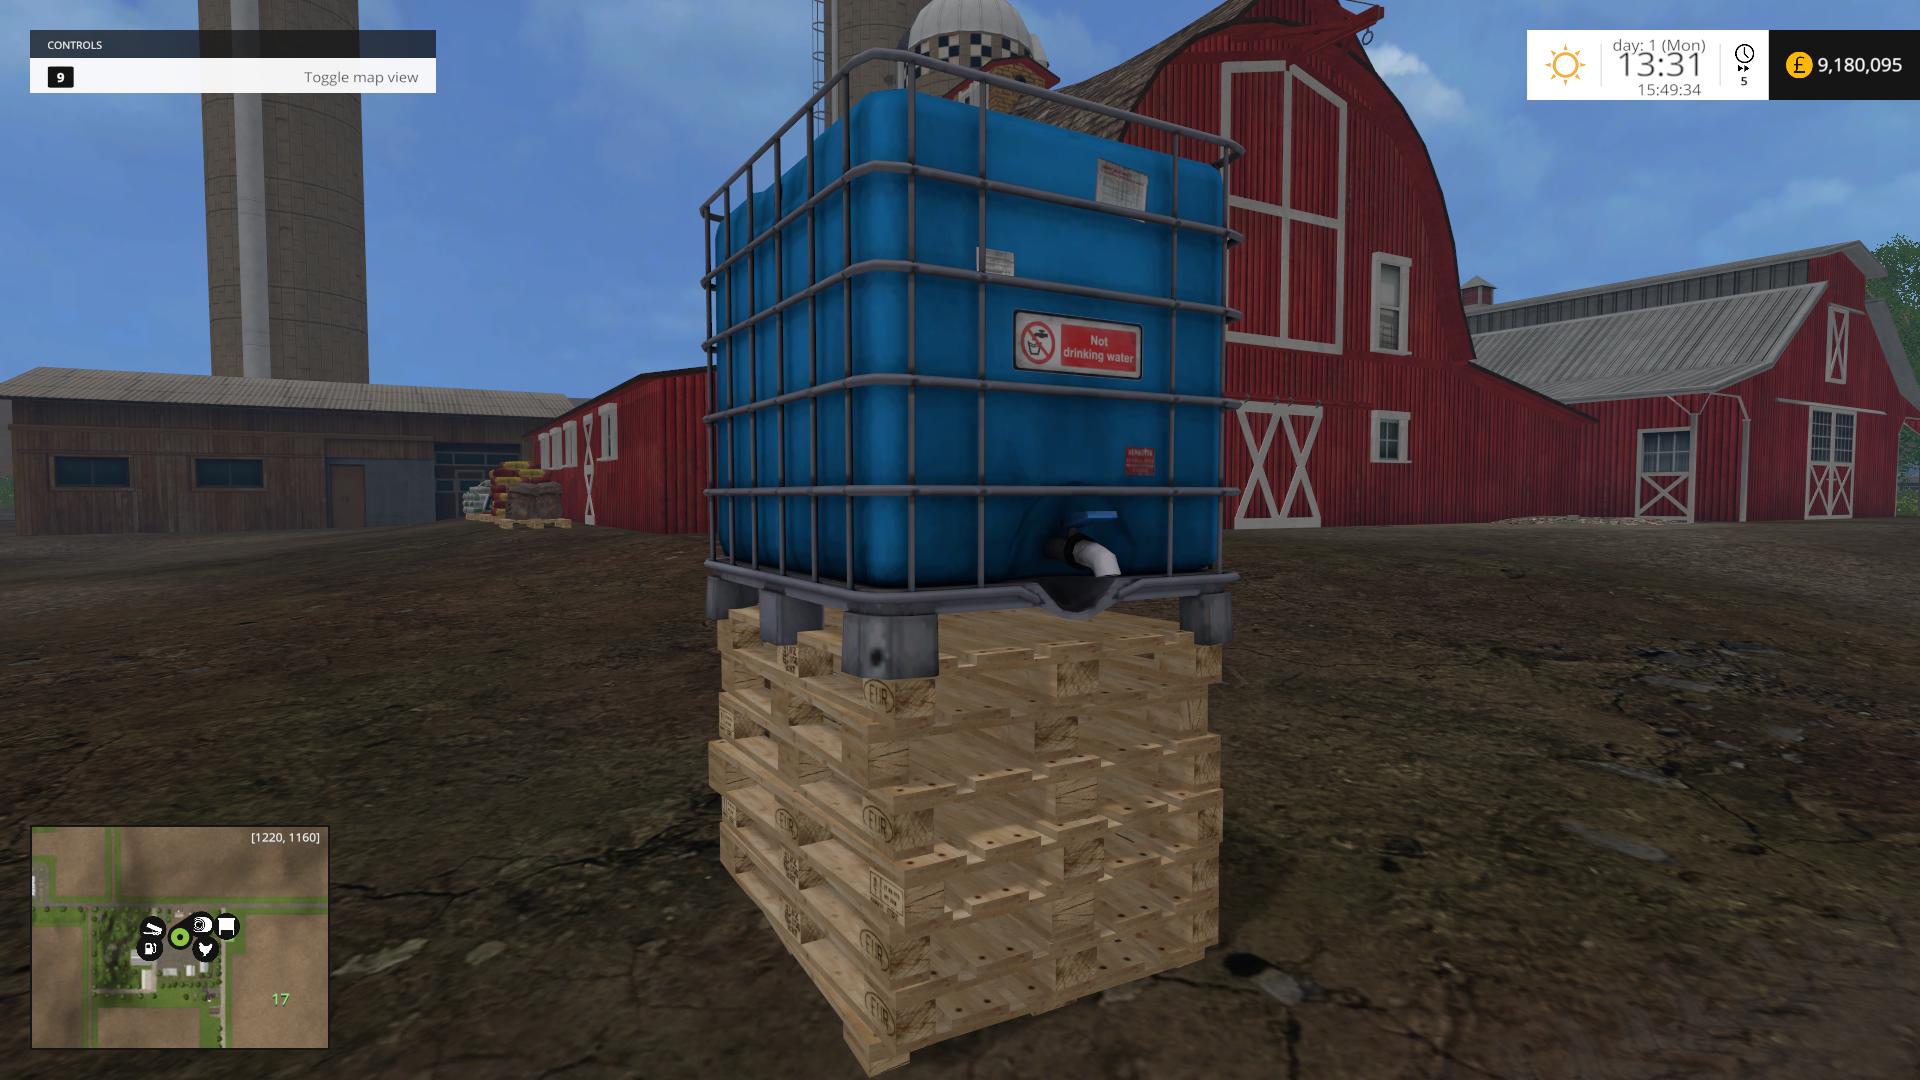 Placeable Ibc Tank With Water Trigger • Farming Simulator 19 17 15 1428